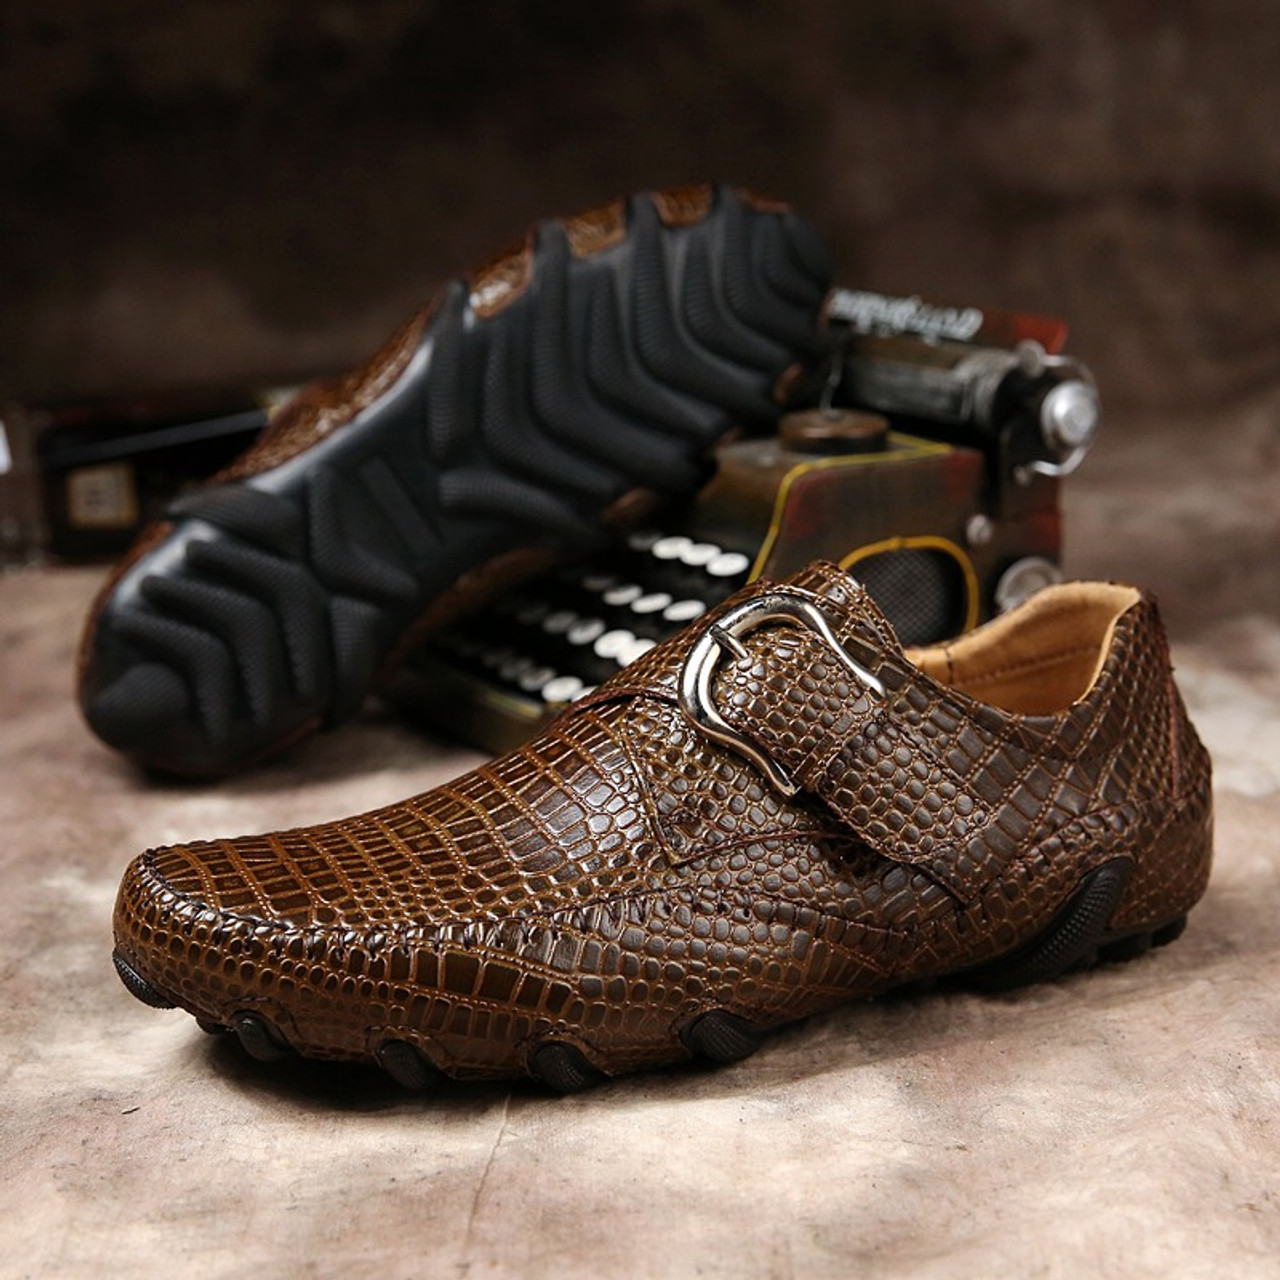 genuine leather loafer shoes for mens